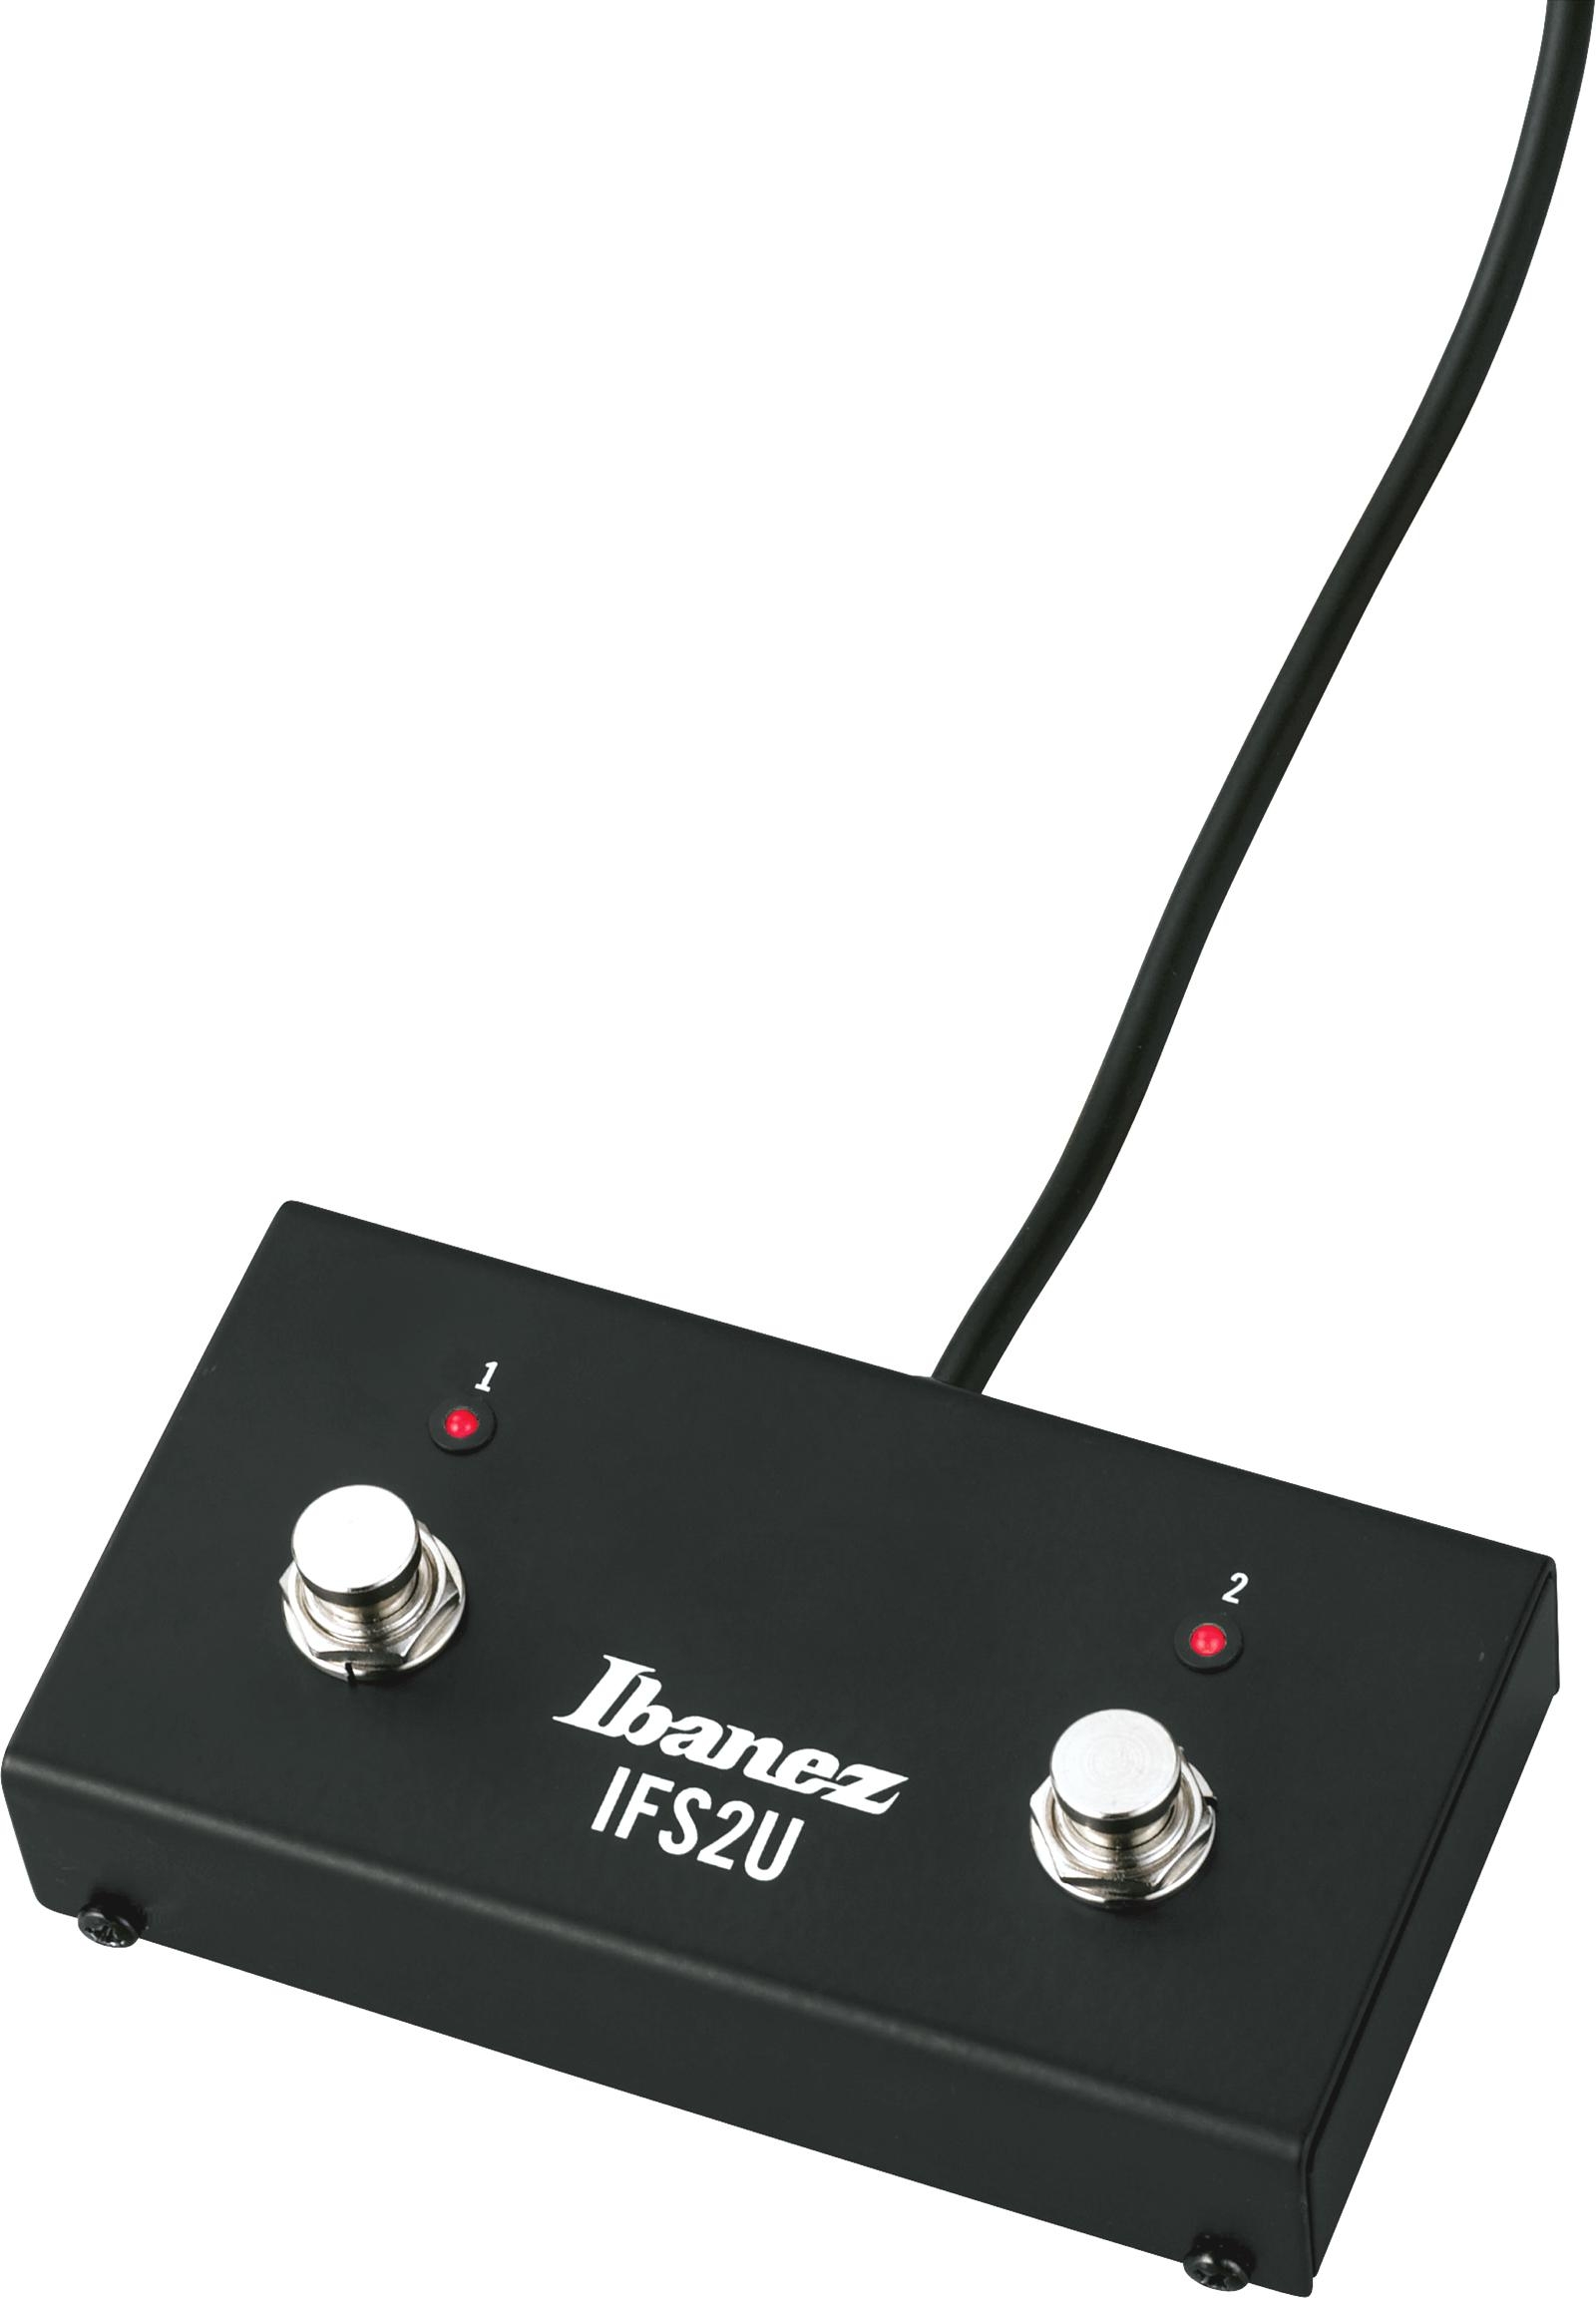 Ibanez Ifs2u Footswitch Pour Troubadour T80n, T150s - Switch pedal - Main picture